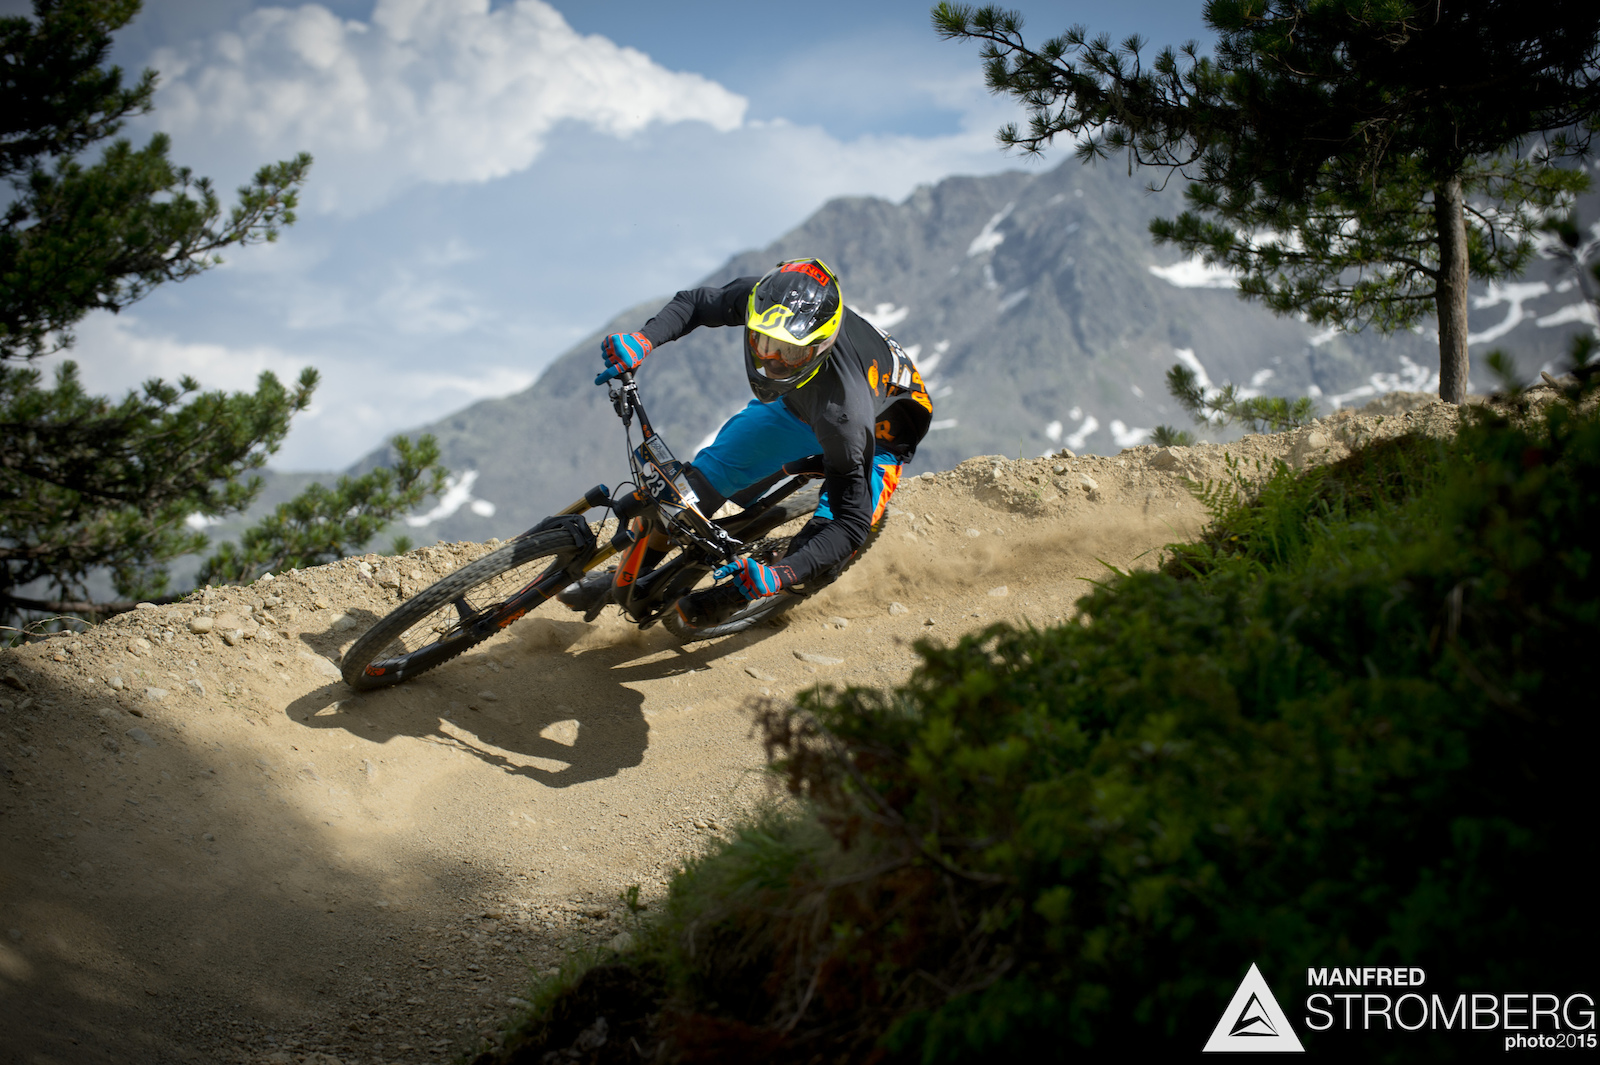 Daniel Schemmel (AUT) races the prologue of the 2nd EES in Sölden Tyrol, Austria, on July 4, 2015.Â Free image for editorial usage only: Photo by Manfred Stromberg